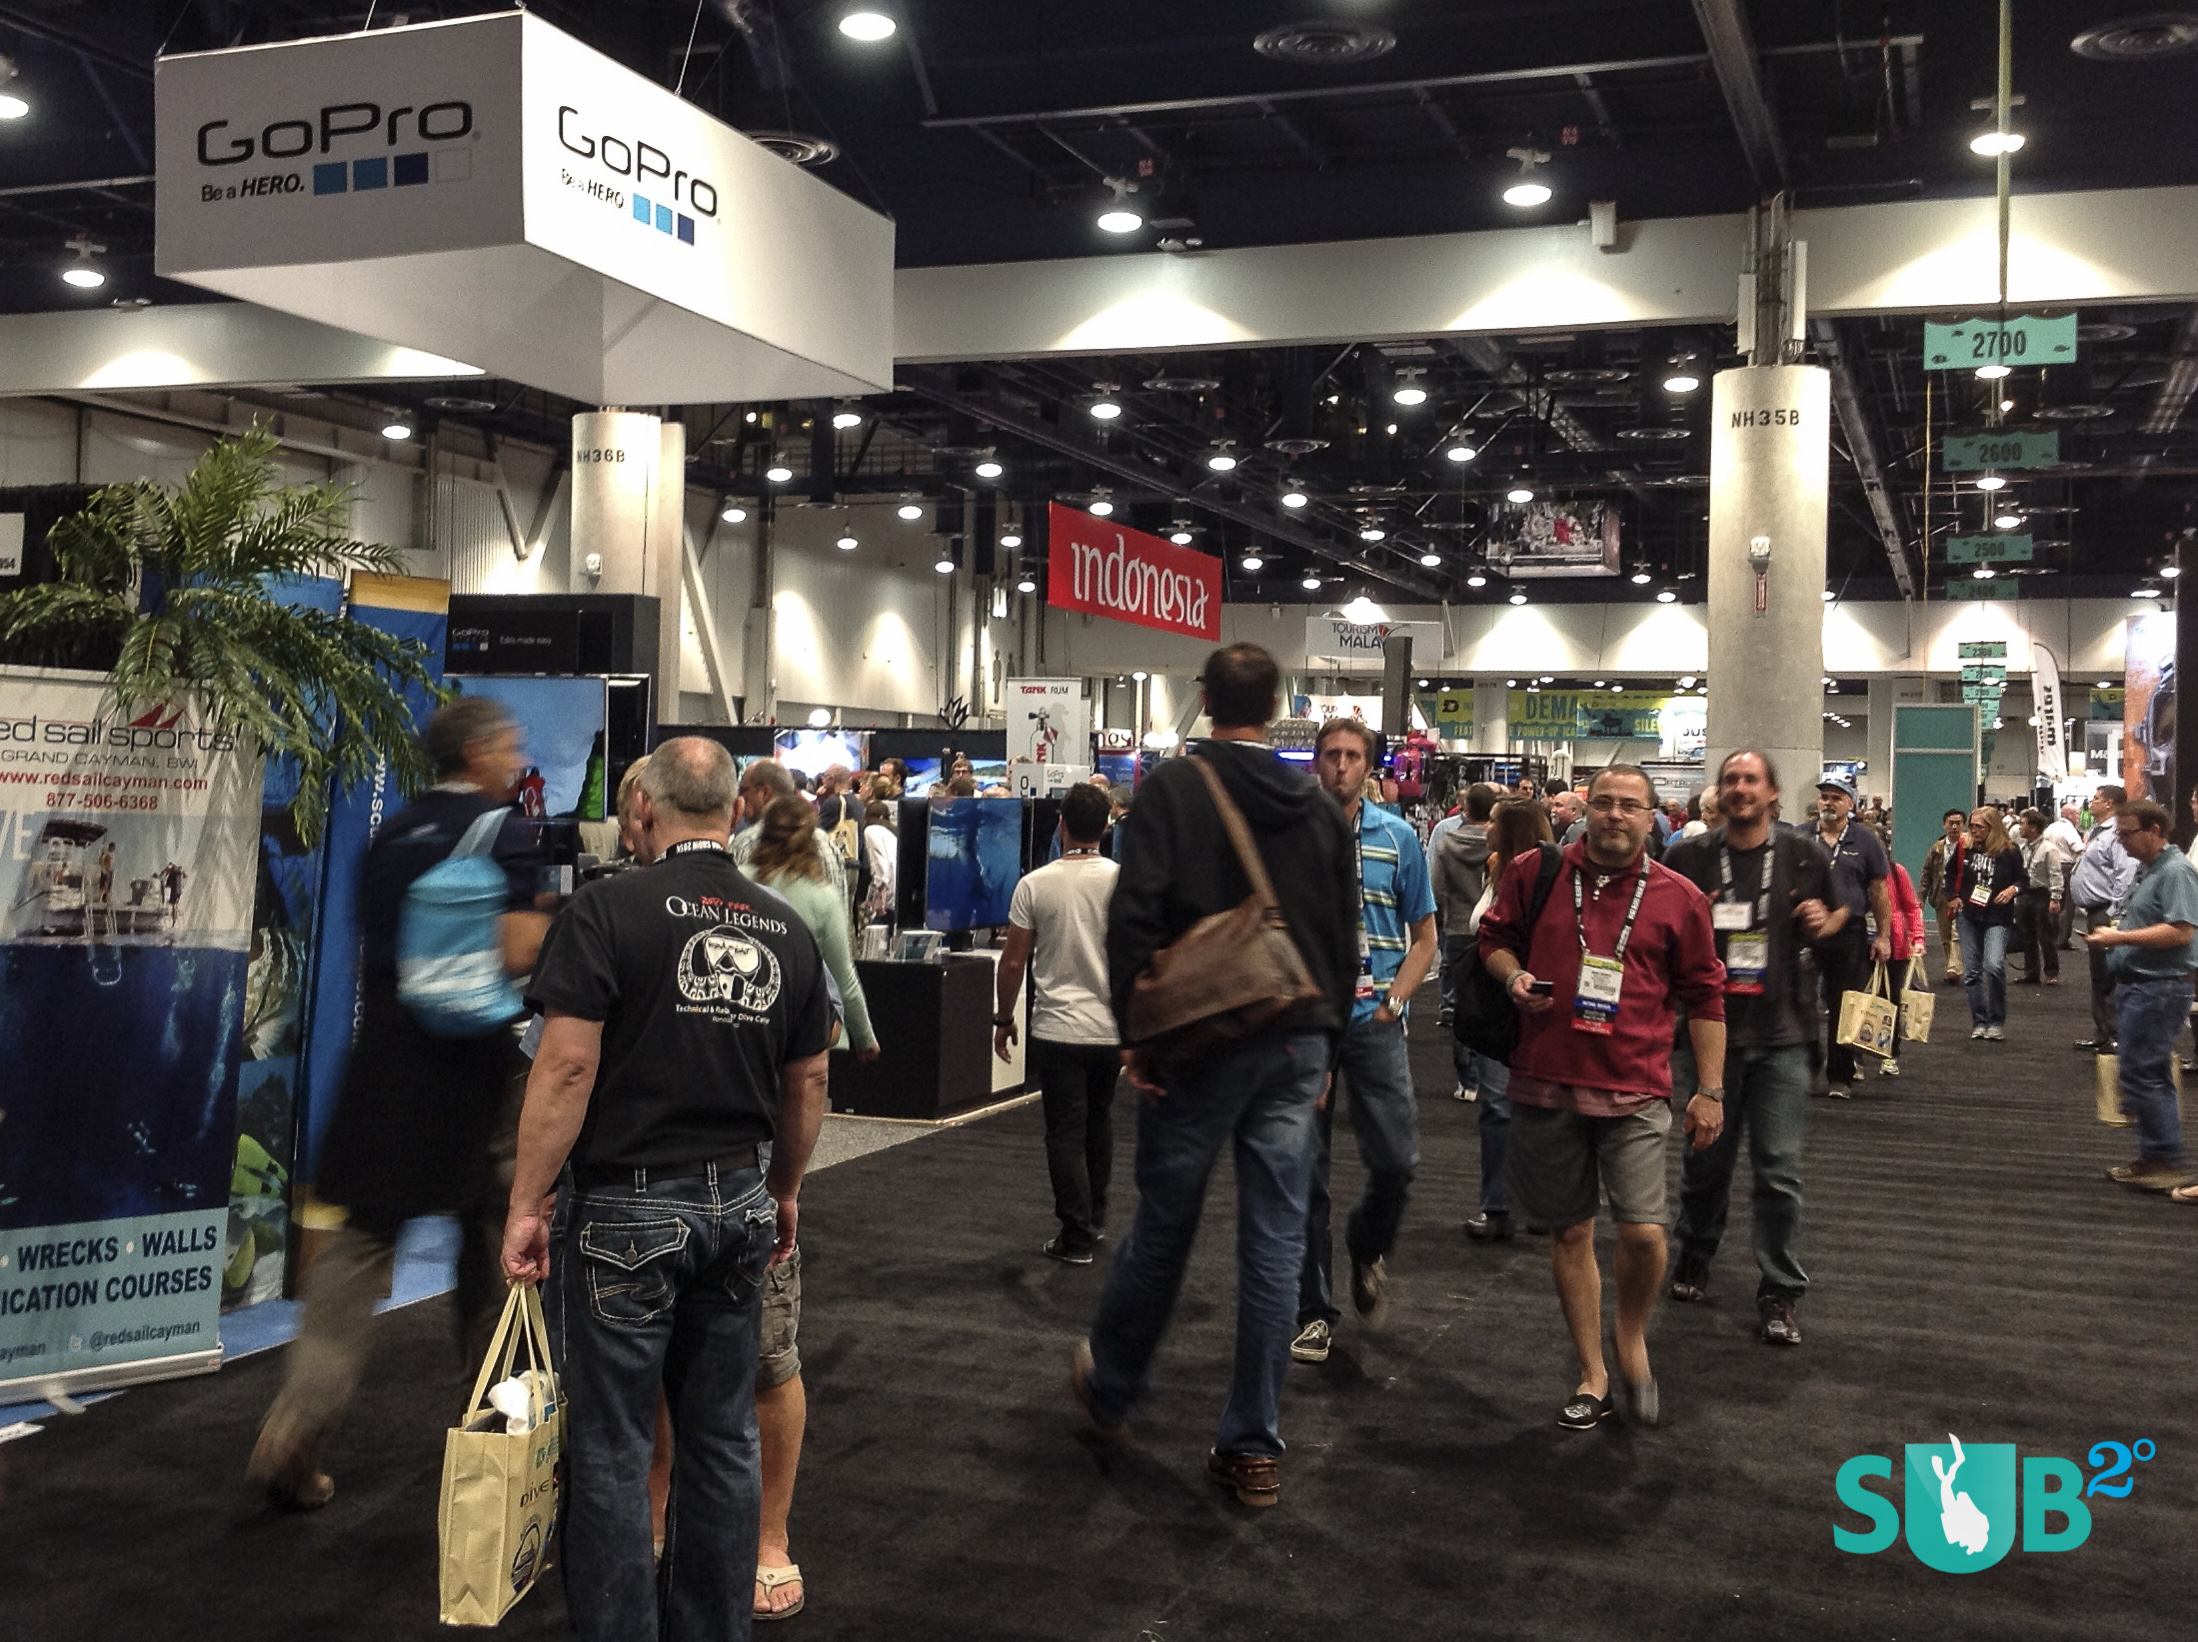 Exploring the many exhibitors at the 2014 DEMA Show in Las Vegas.